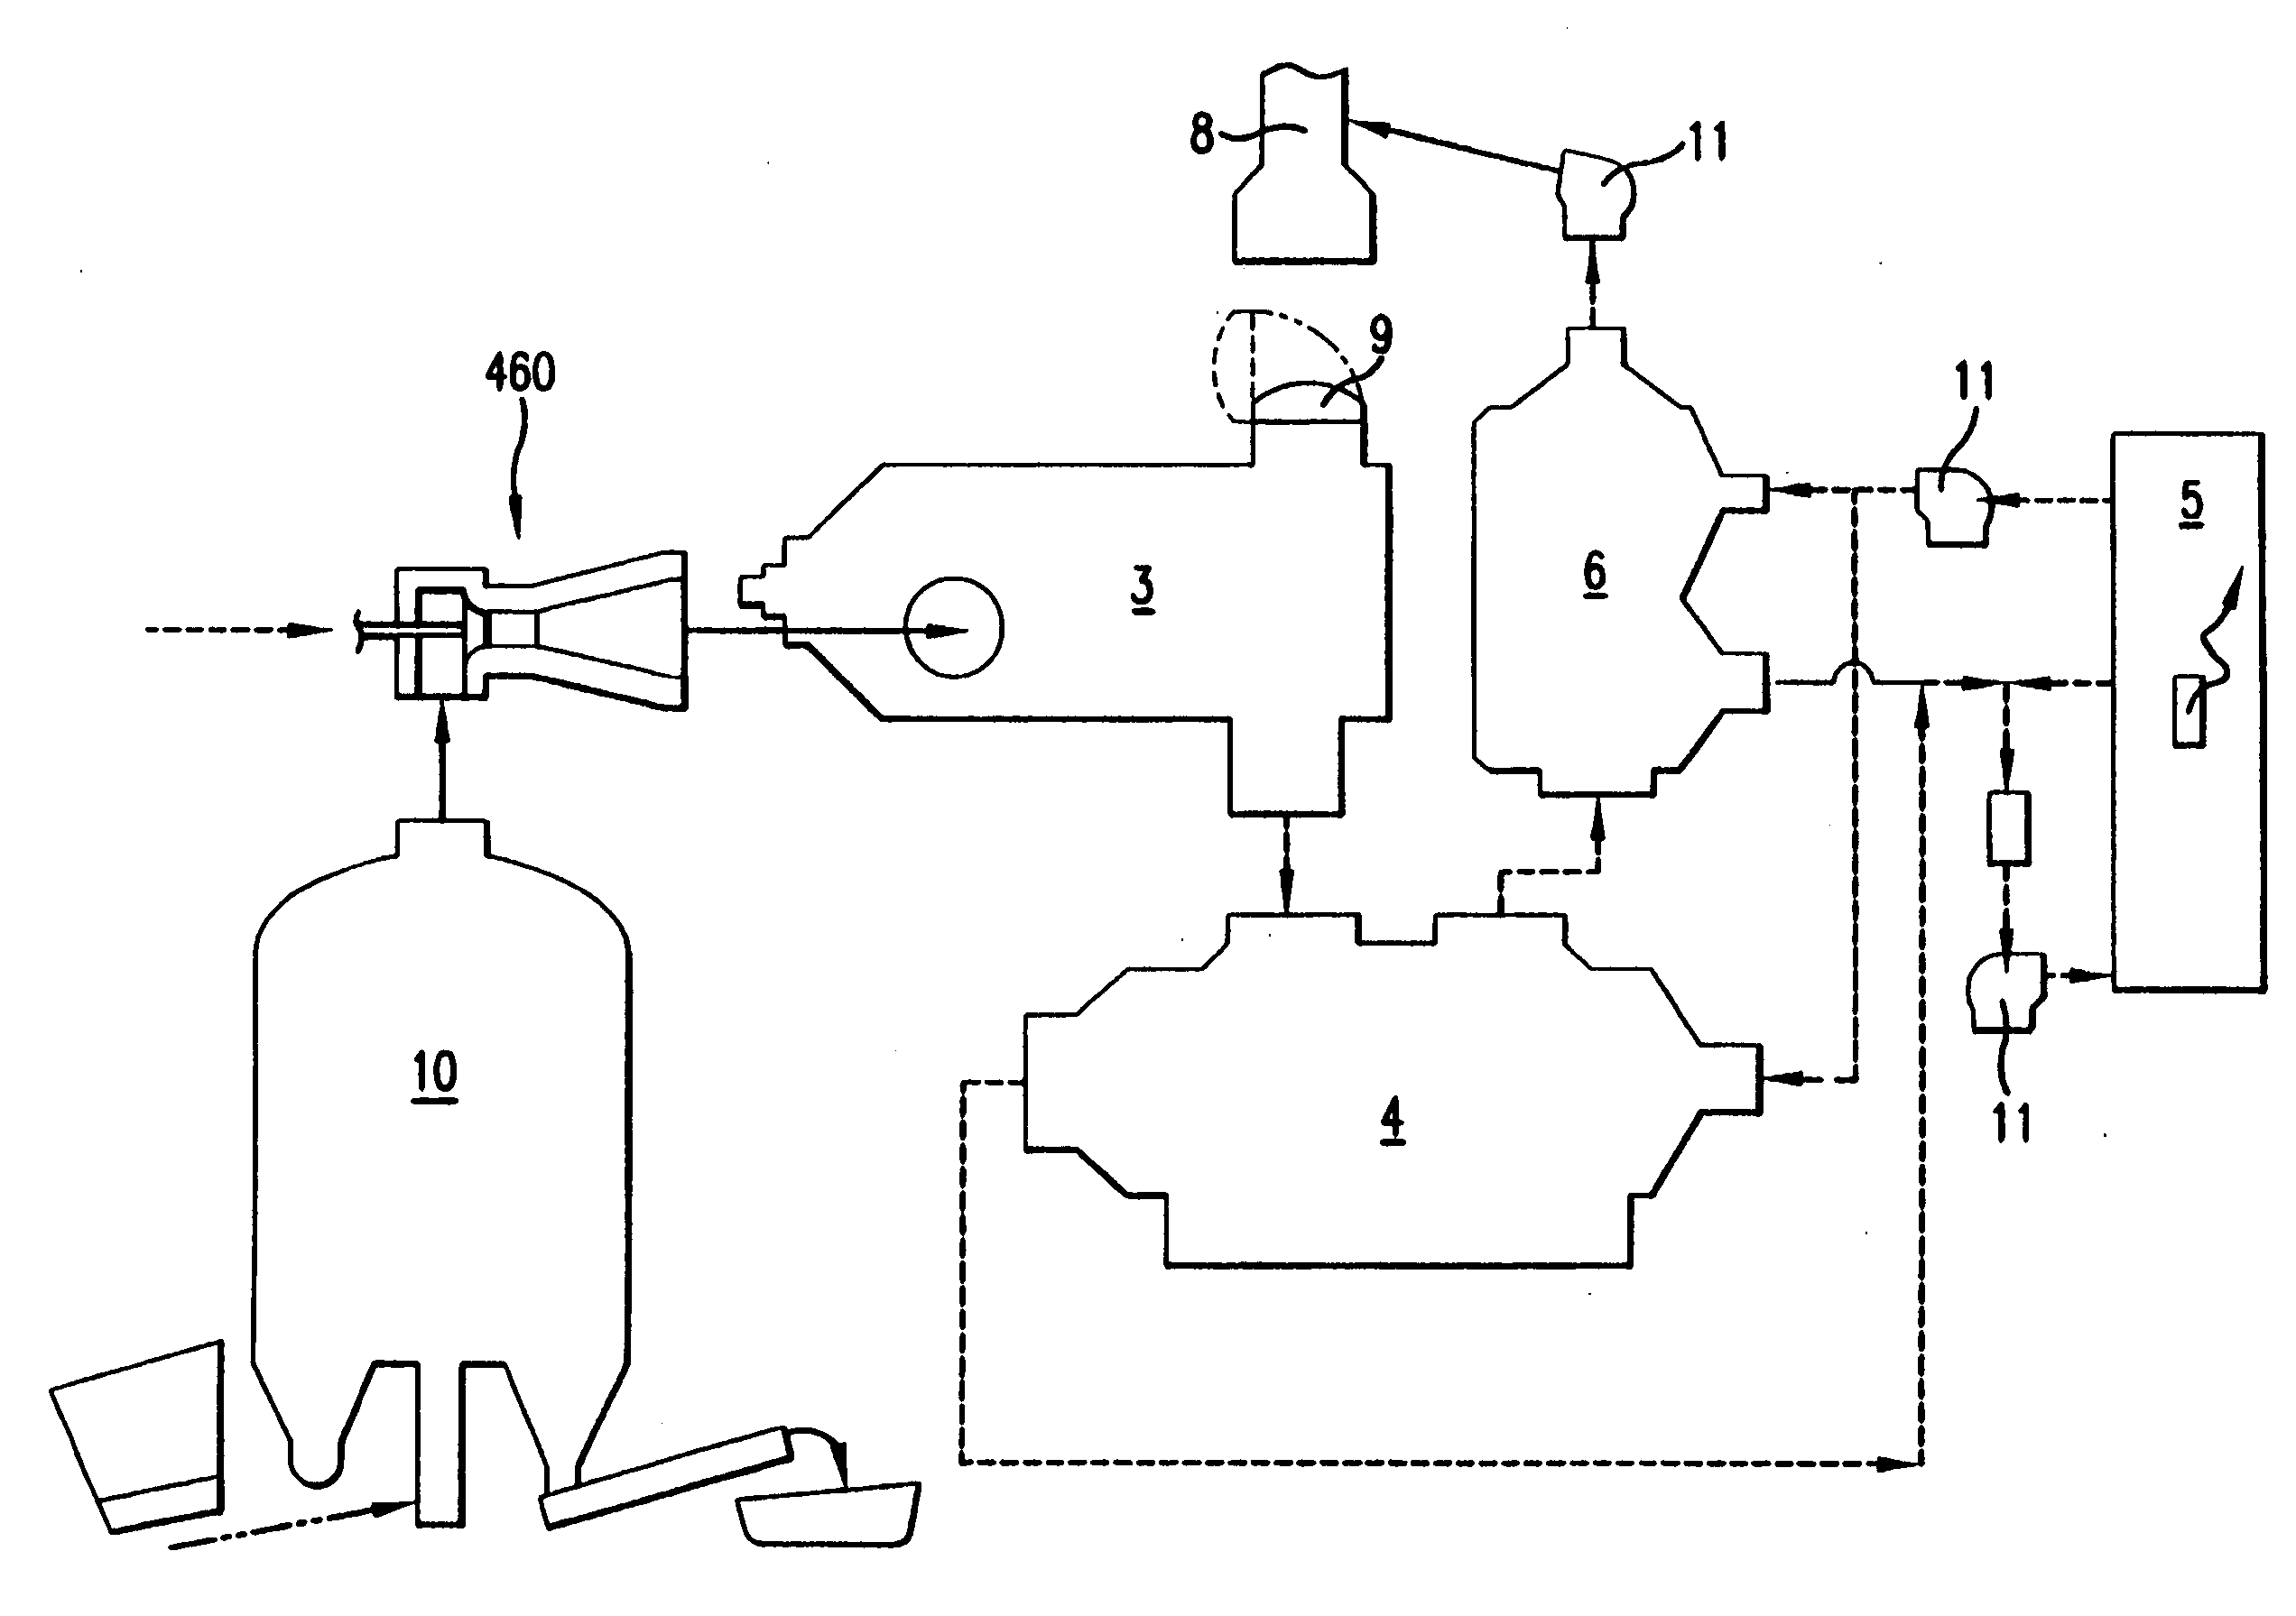 Pyrolyzing gasification system and method of use